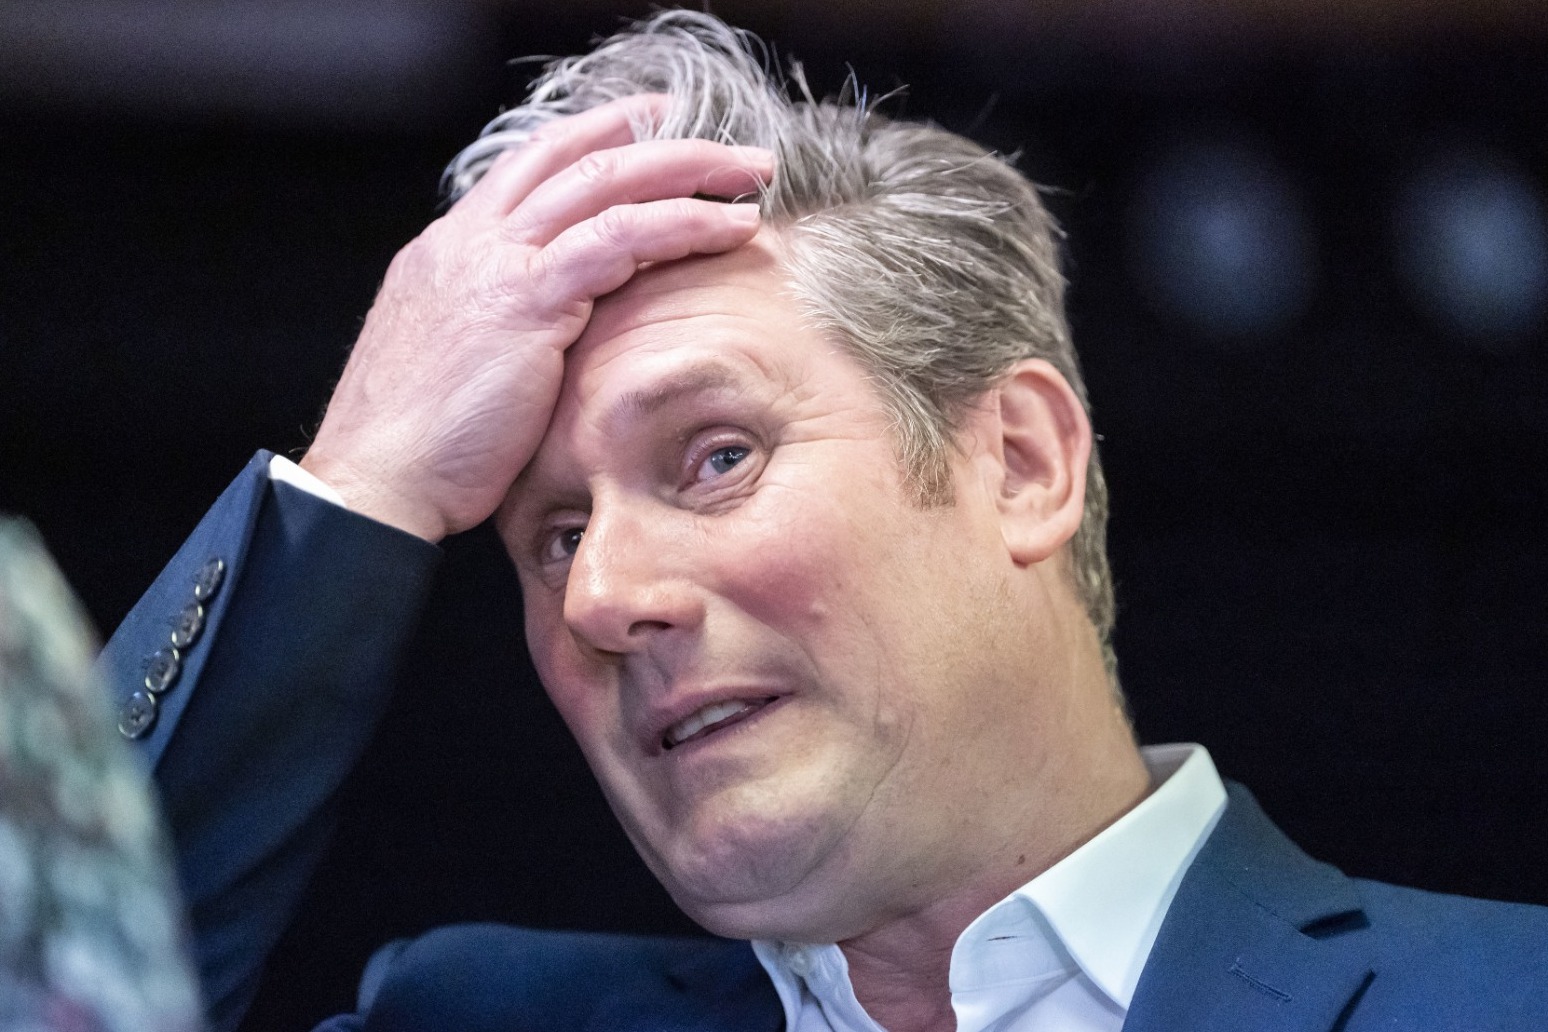 Sir Keir Starmer to be investigated over ‘beergate’ allegations 